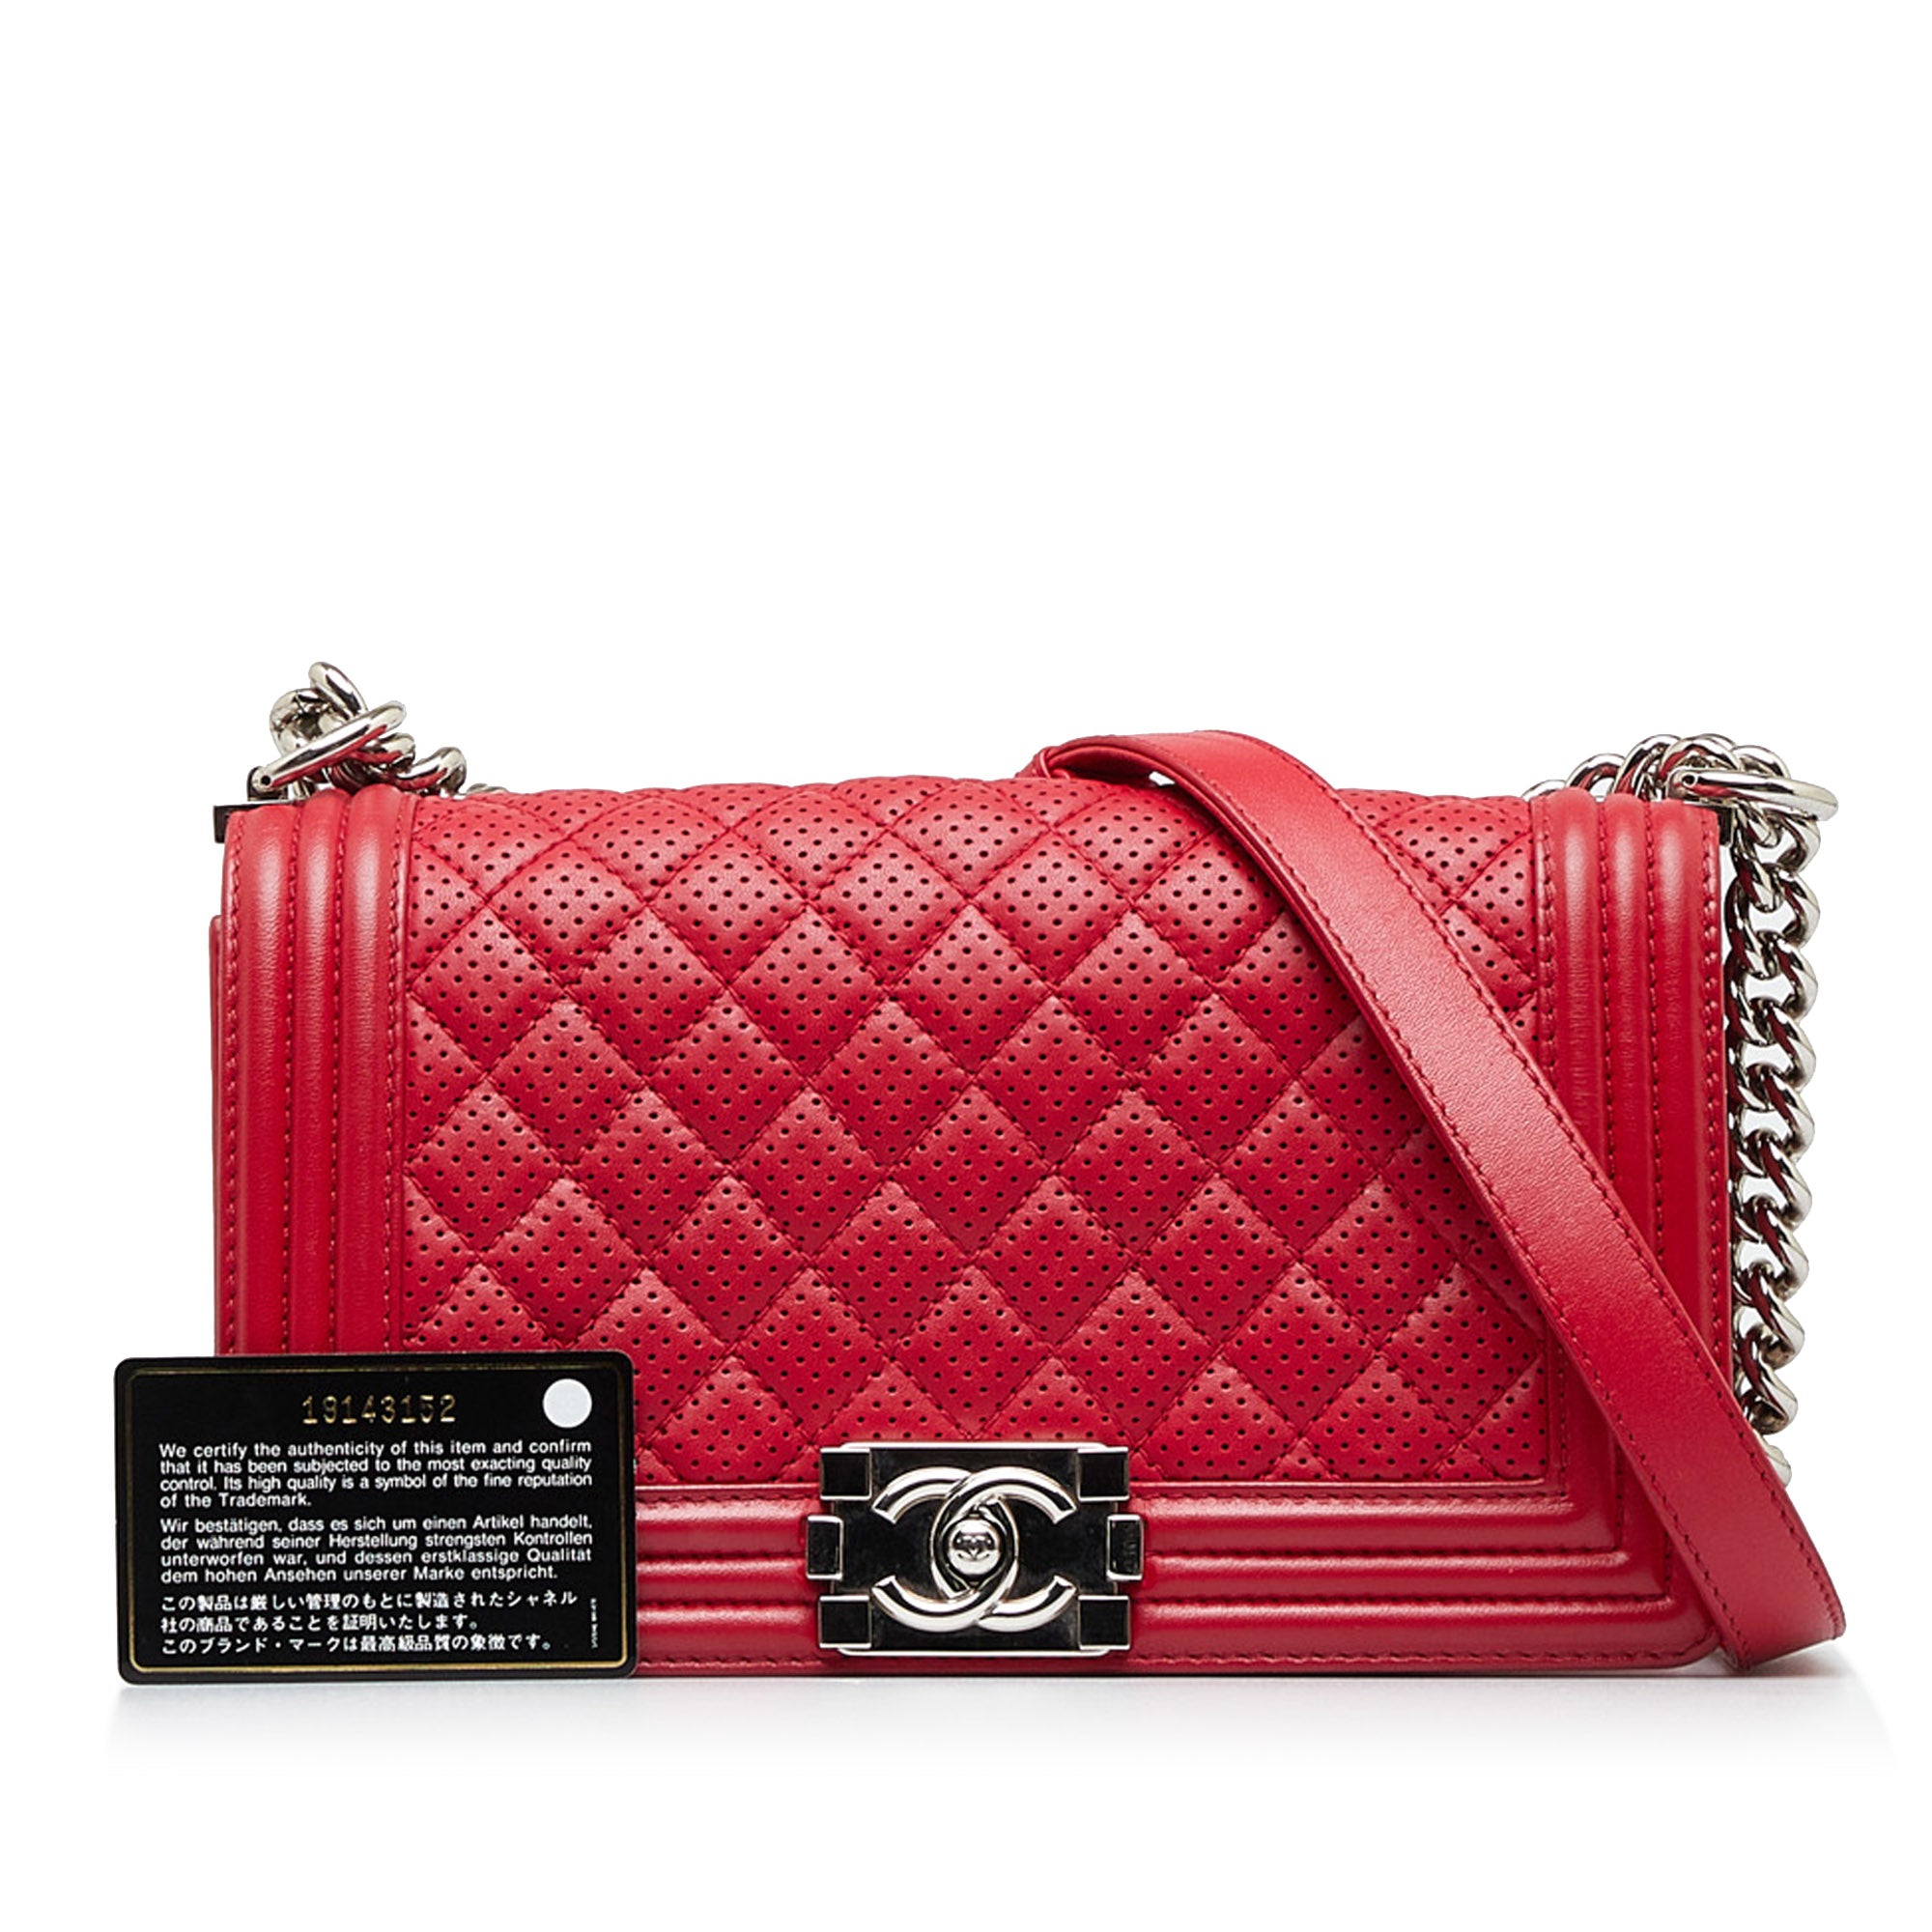 Chanel Lambskin Quilted Medium Boy Red Flap Bag Auction